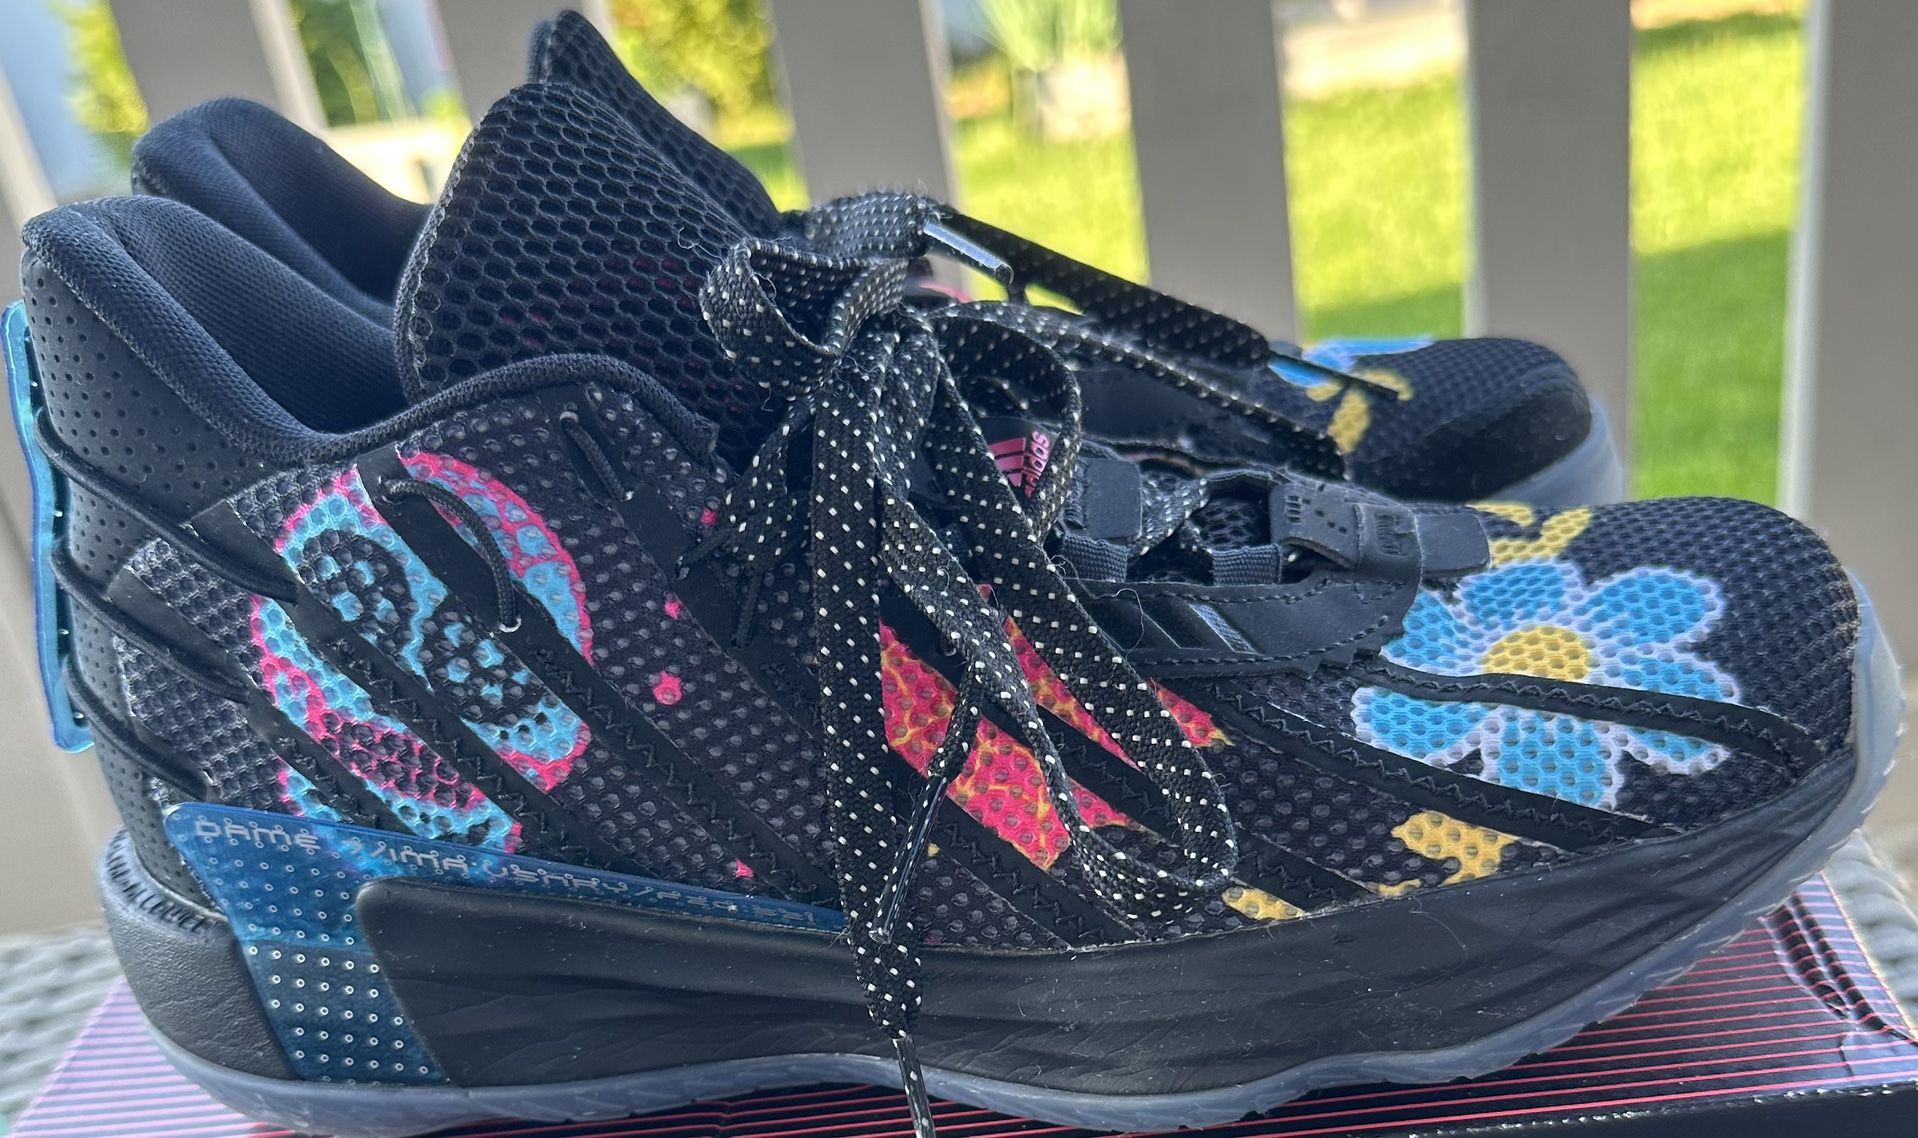 Dame 7 Day of The Dead 6.5Y basketball shoes